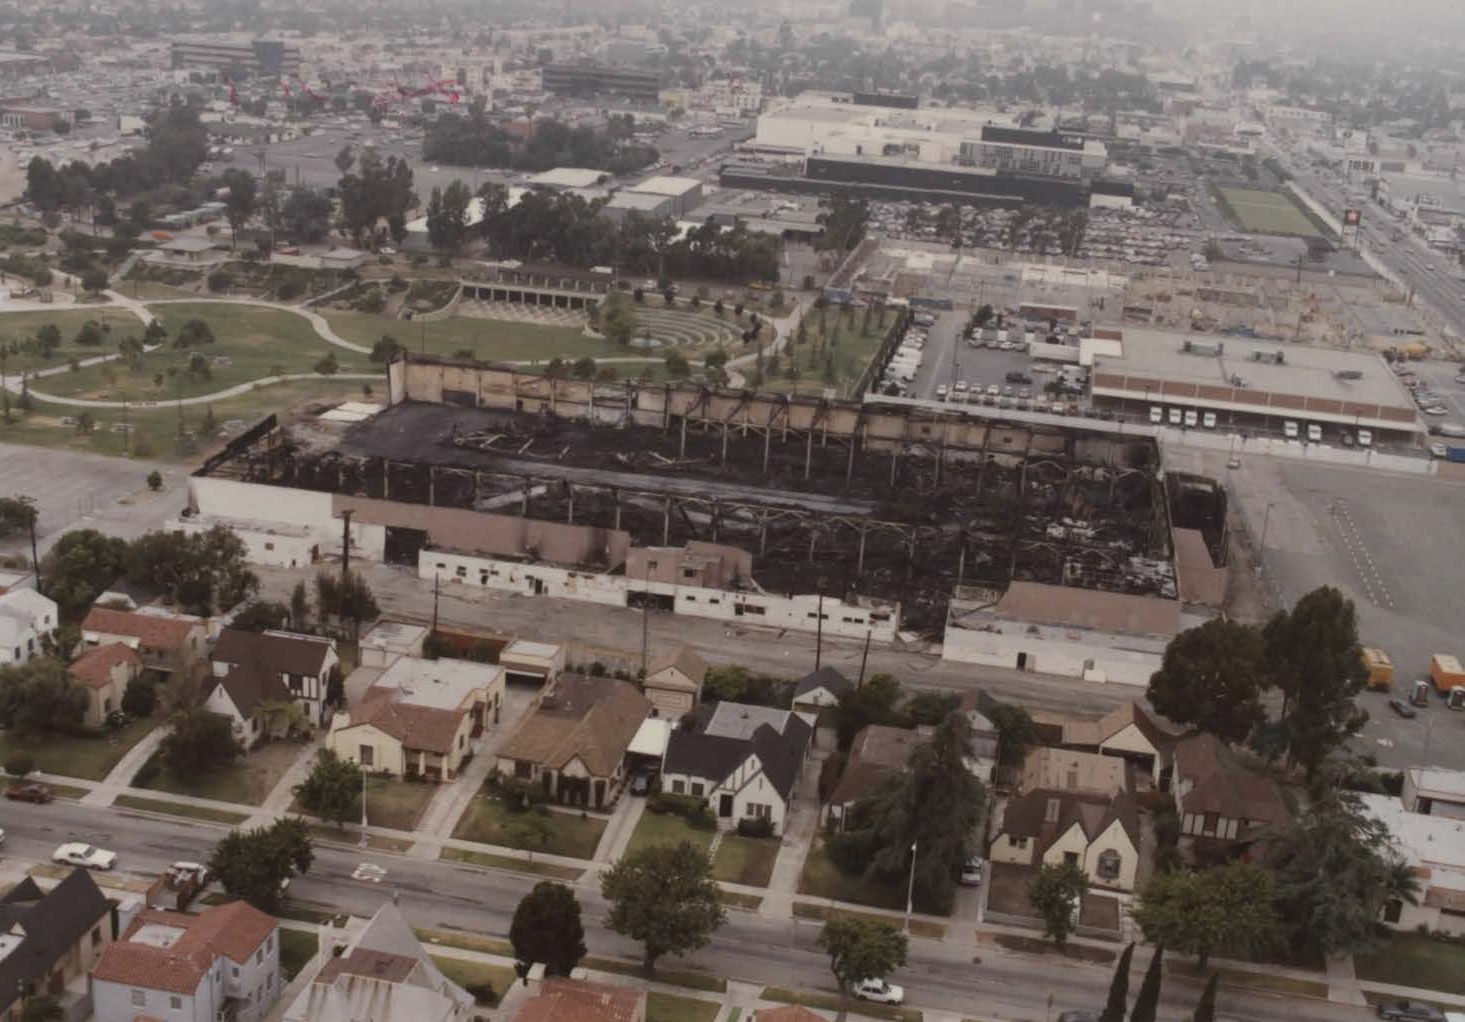 Pan Pacific Auditorium, Los Angeles California After the fire (1989)